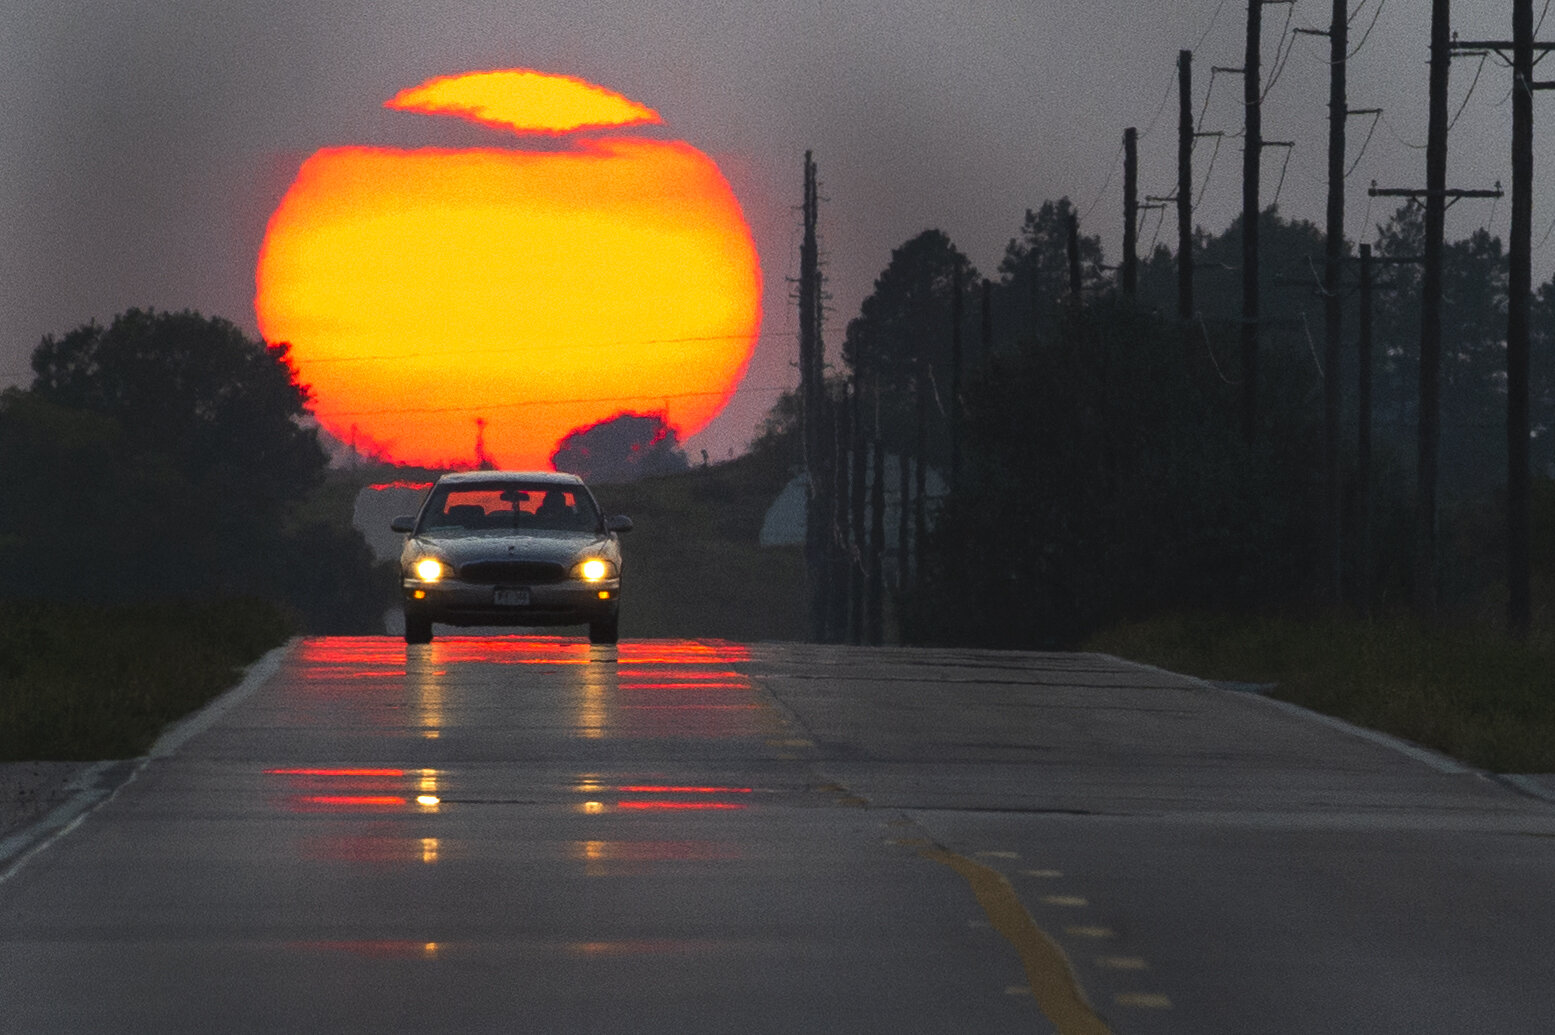  A driver makes their way east as the sun, obscured by smoke from wildfires in the west, sets behind them Monday, September 21, 2020, in Denton, Nebraska. KENNETH FERRIERA, Journal Star. 